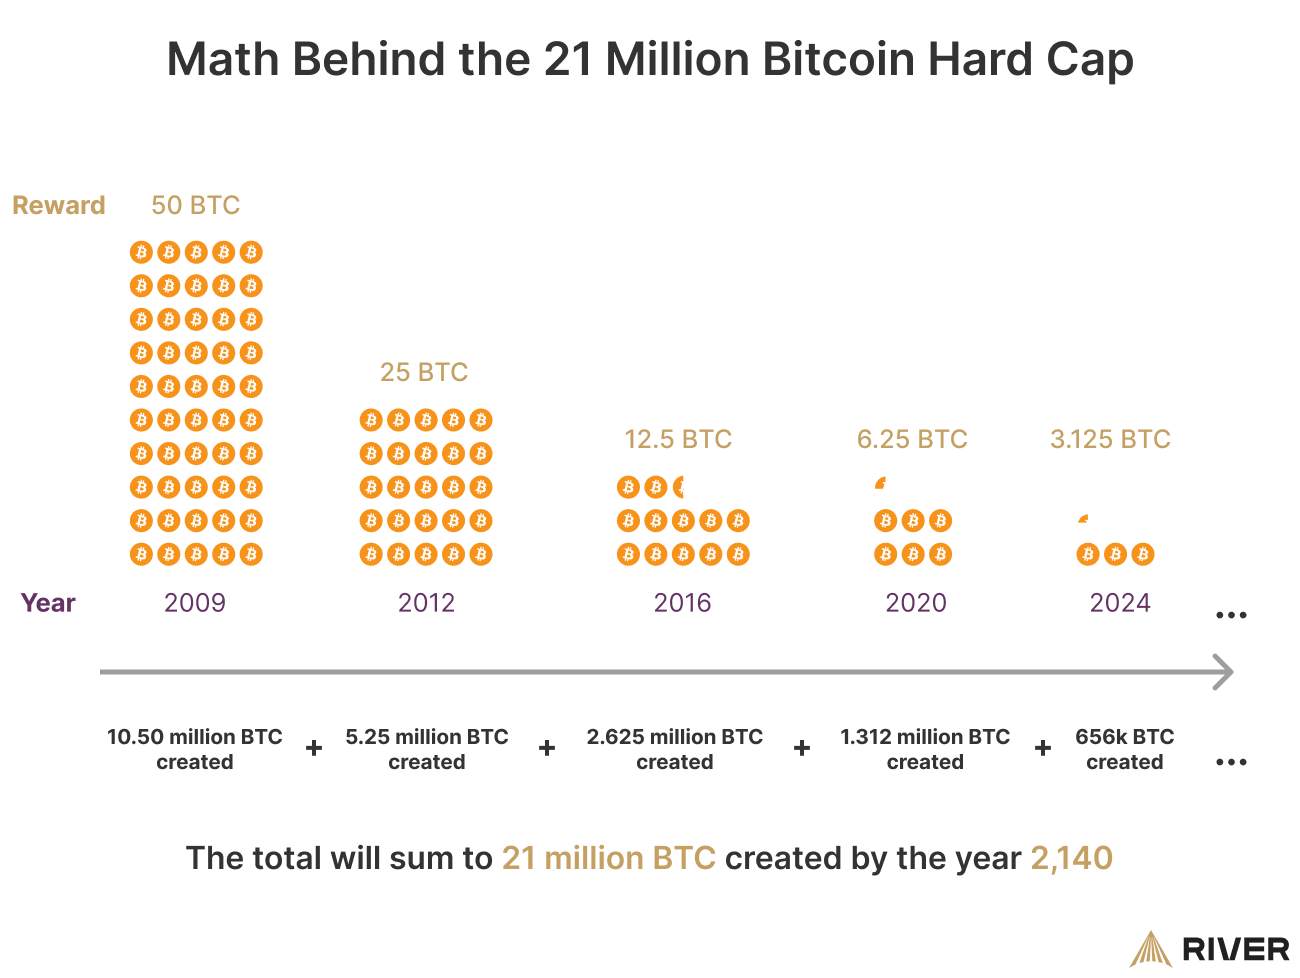 An infographic showing Bitcoin&rsquo;s halving events and the decreasing reward over years, leading to a total of 21 million BTC by 2140.